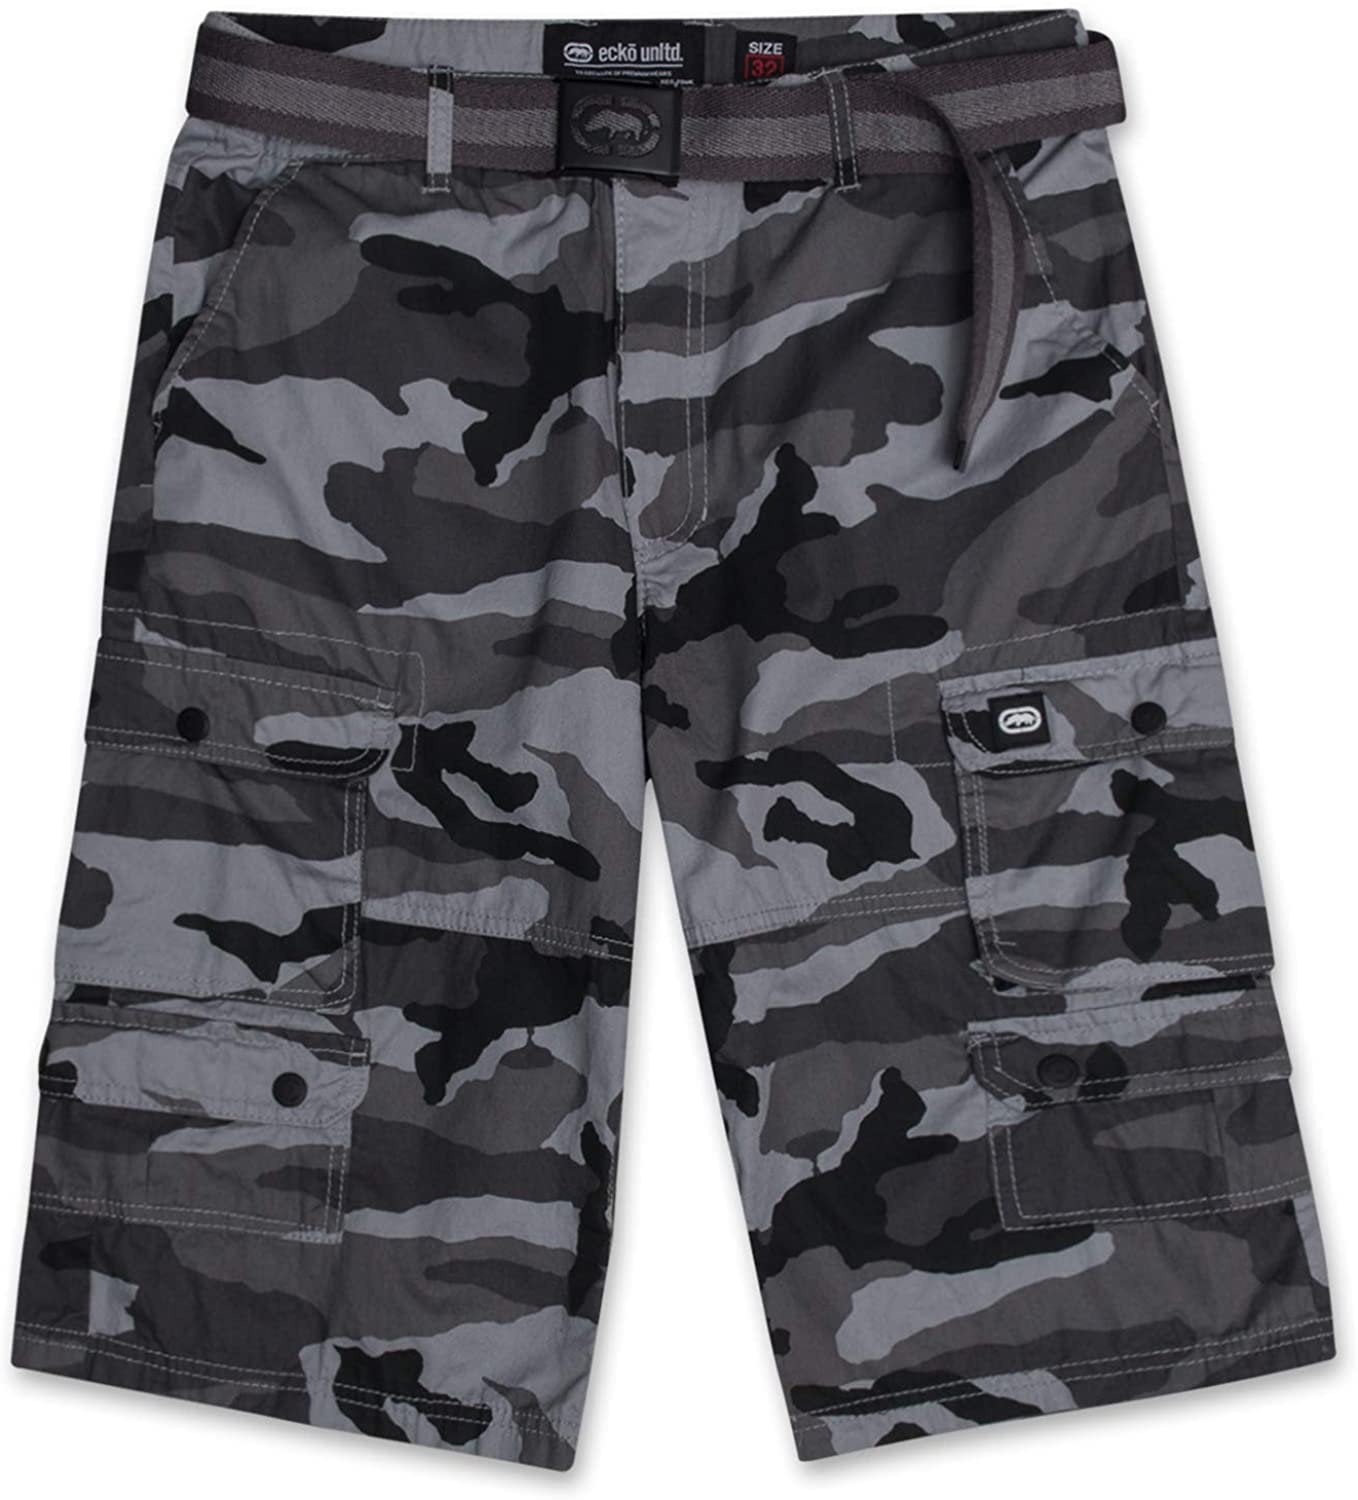 Mens Cargo Shorts with Belt Cargo Shorts for Men Twill Shorts by ECKO